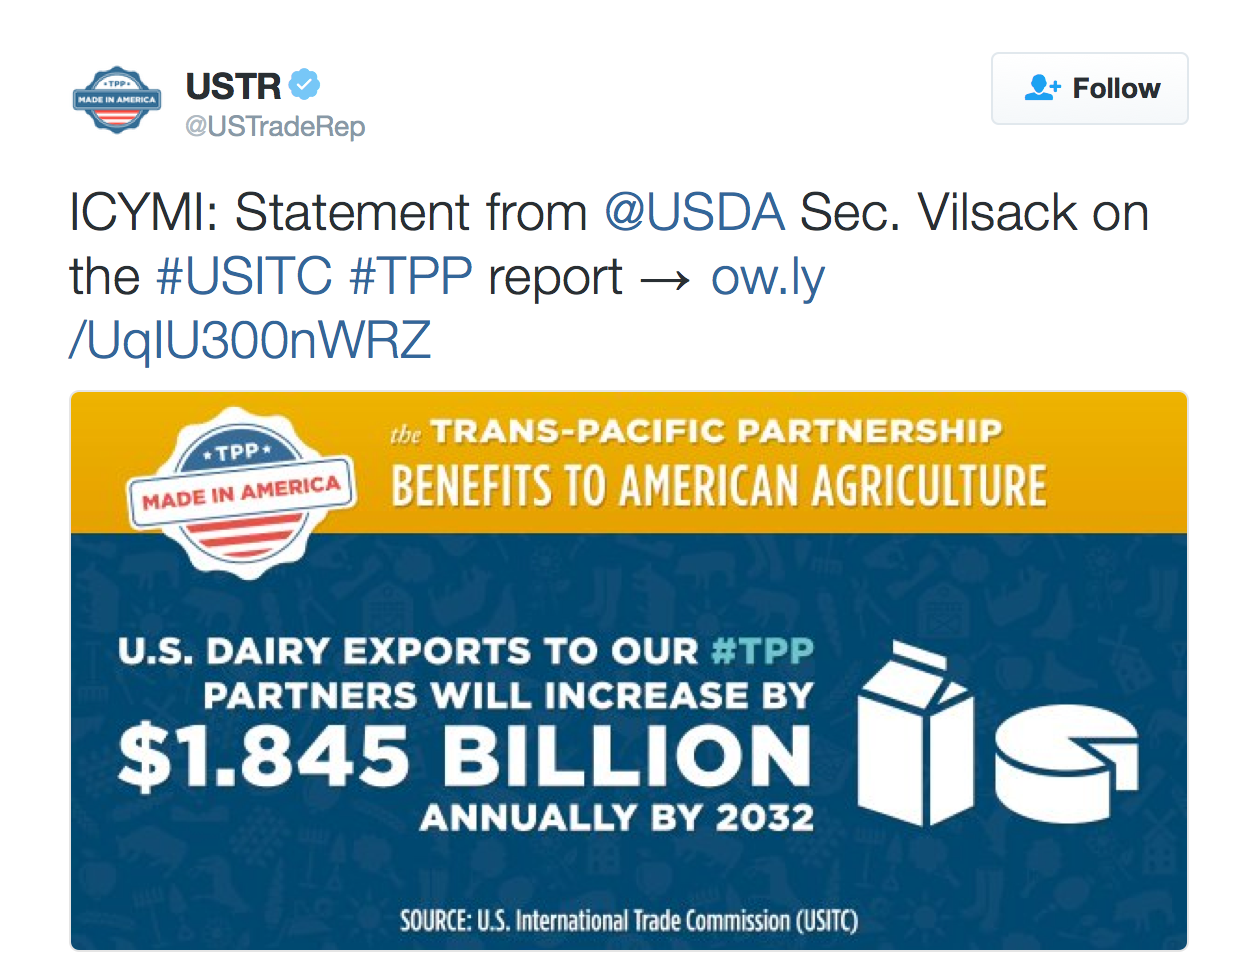 ICYMI: Statement from @USDA Sec. Vilsack on the #USITC #TPP report → http://ow.ly/UqIU300nWRZ 